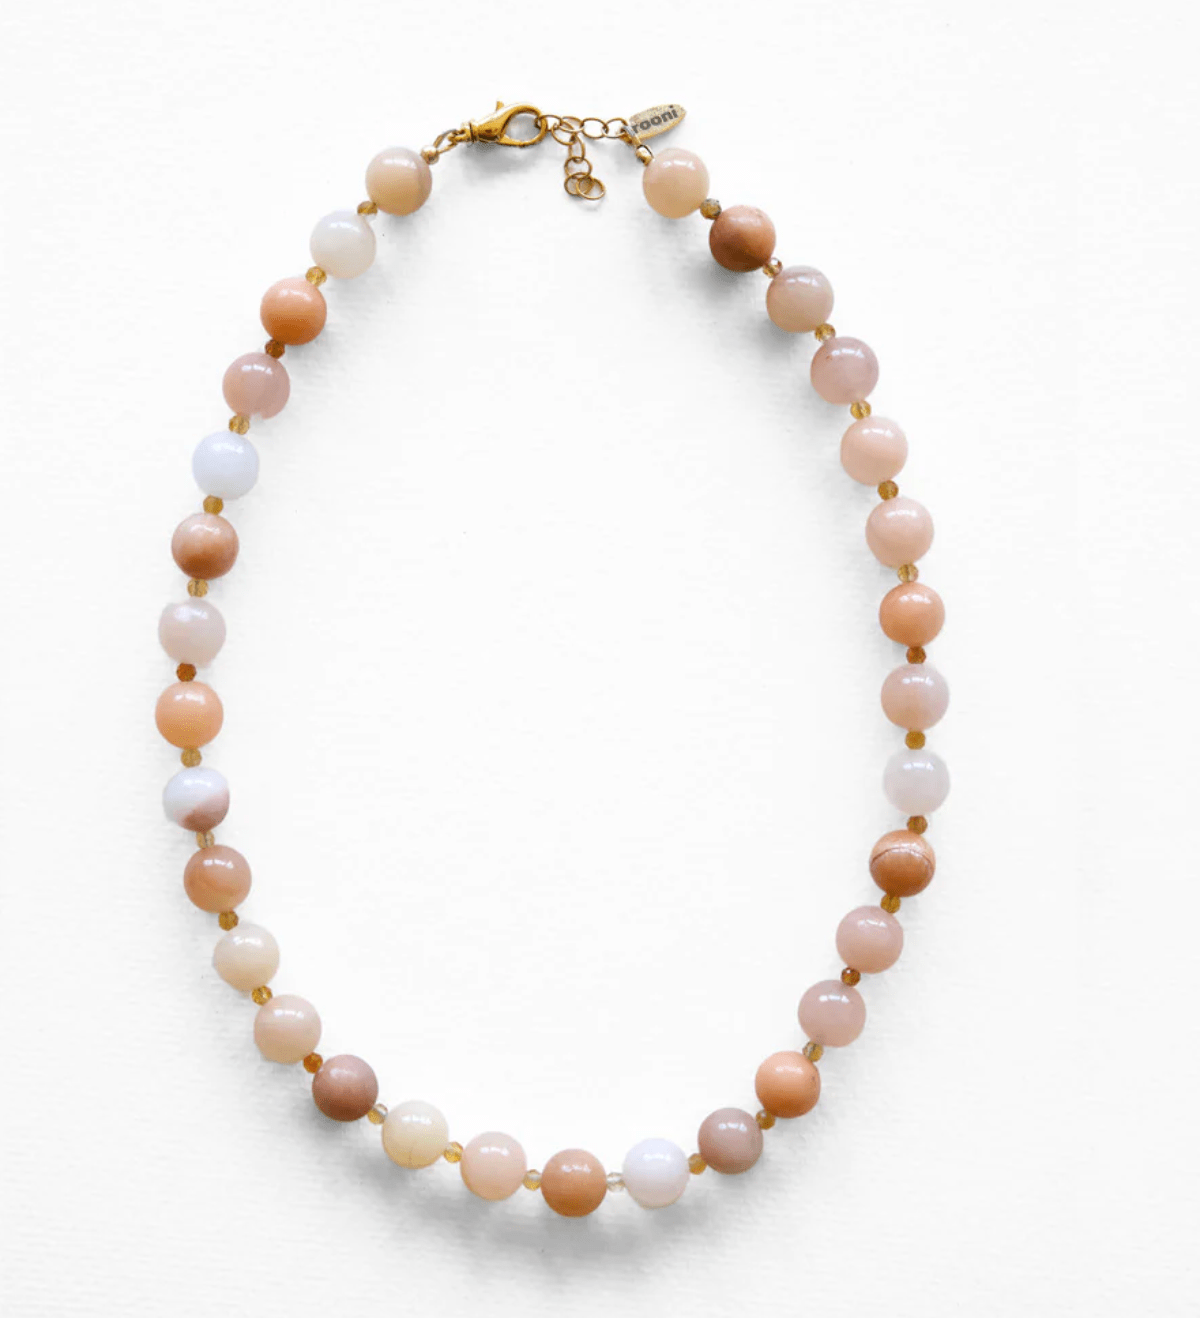 Made by Rooni Jewelry Sunstone + Moonstone + Citrine / Large Made by Rooni Gemstone Necklace